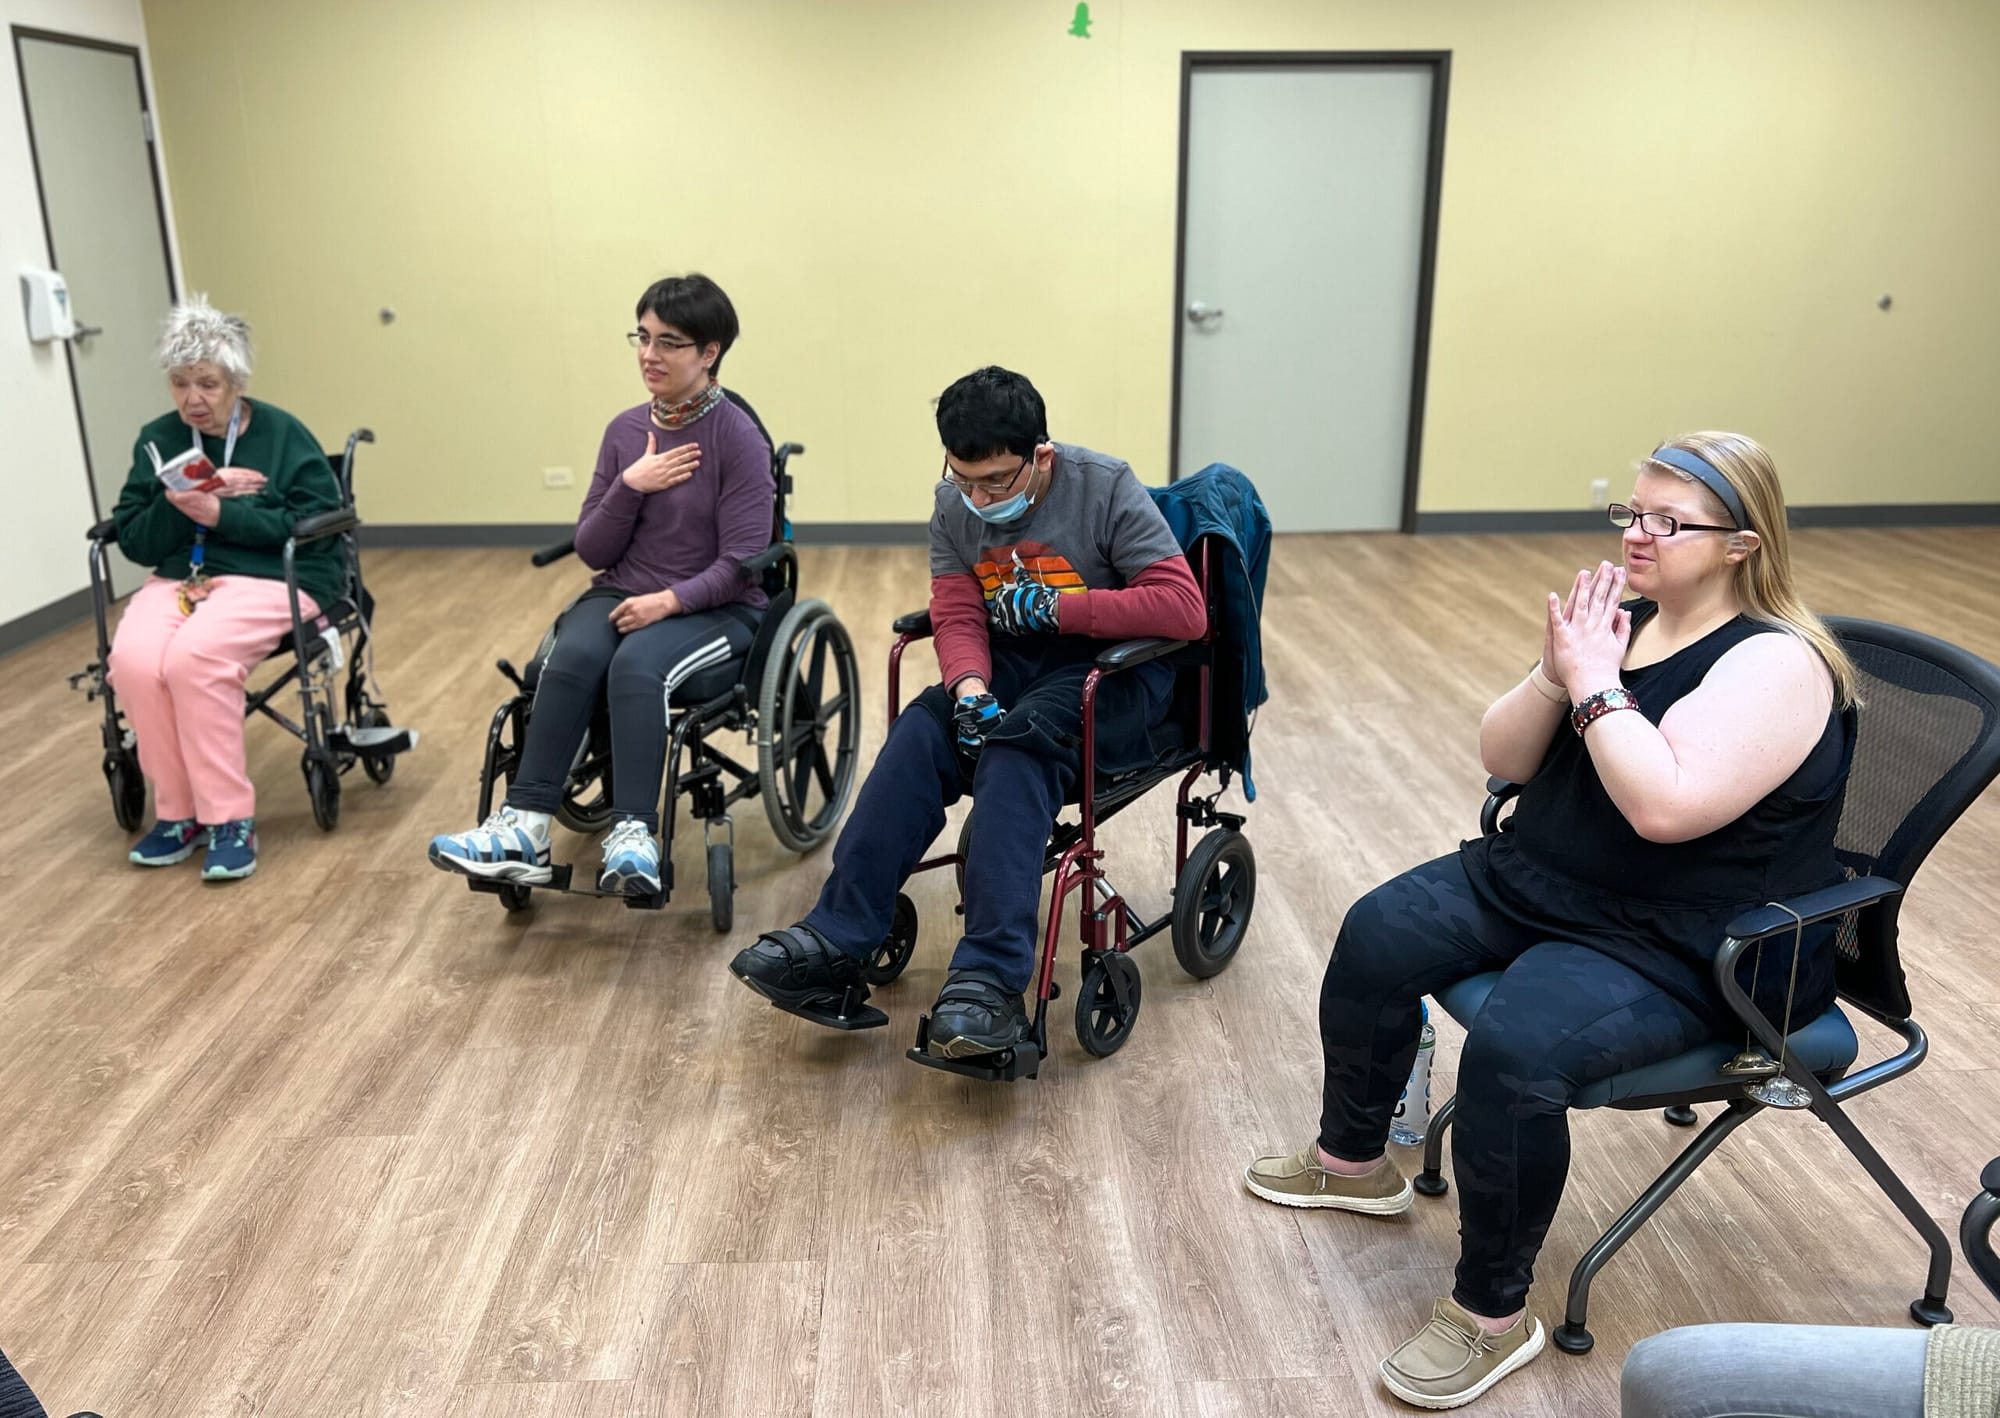 A CPWD Peer Support Group practices yoga. Four poeple are pictured. The three on the left are in wheelchairs, the woman on the right is seated in a chair.